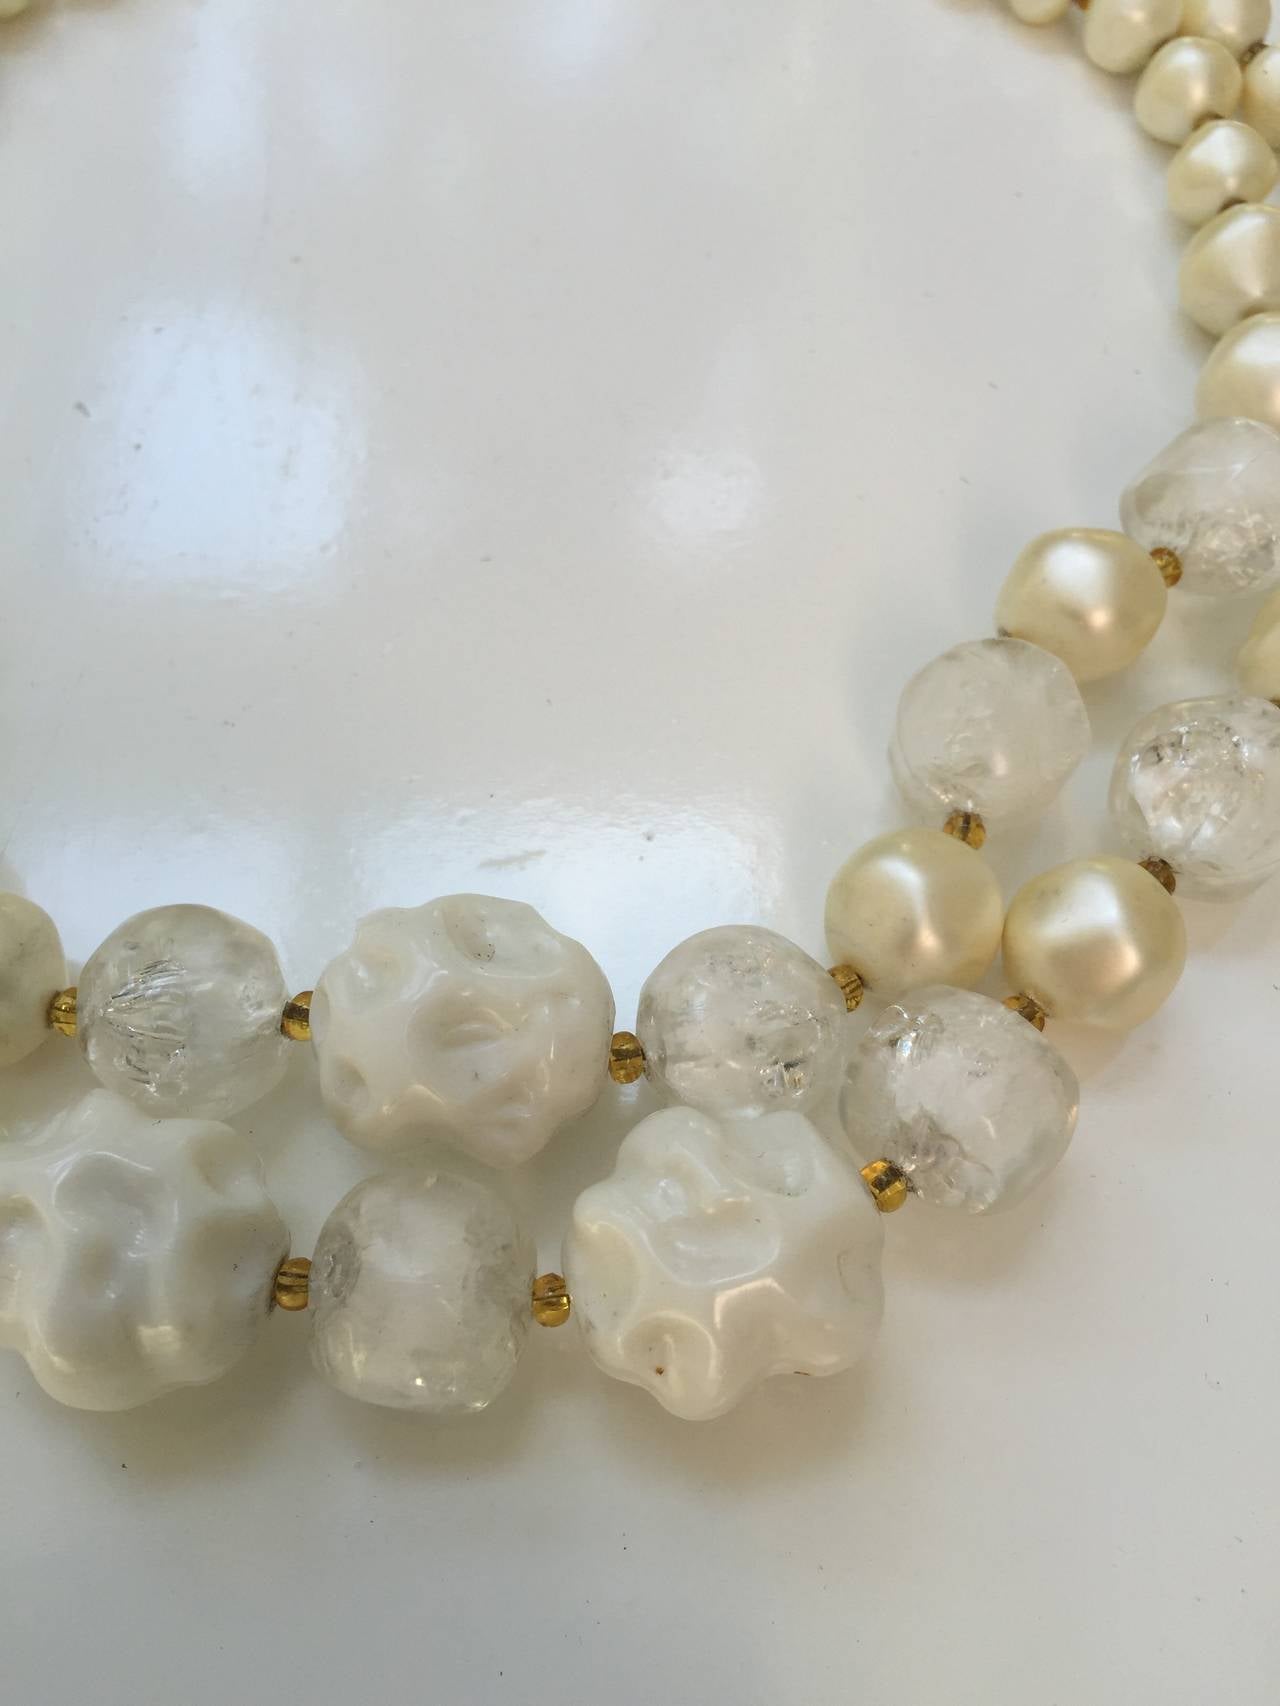 Elsa Schiaparelli 1960s double strand faux cream pearls, beads, clear & white abstract beads necklace. Elsa Schiaparelli founded a fashion house in Paris in the early 20s and drove costume jewelry to the cutting edge of fashion as is shown in this